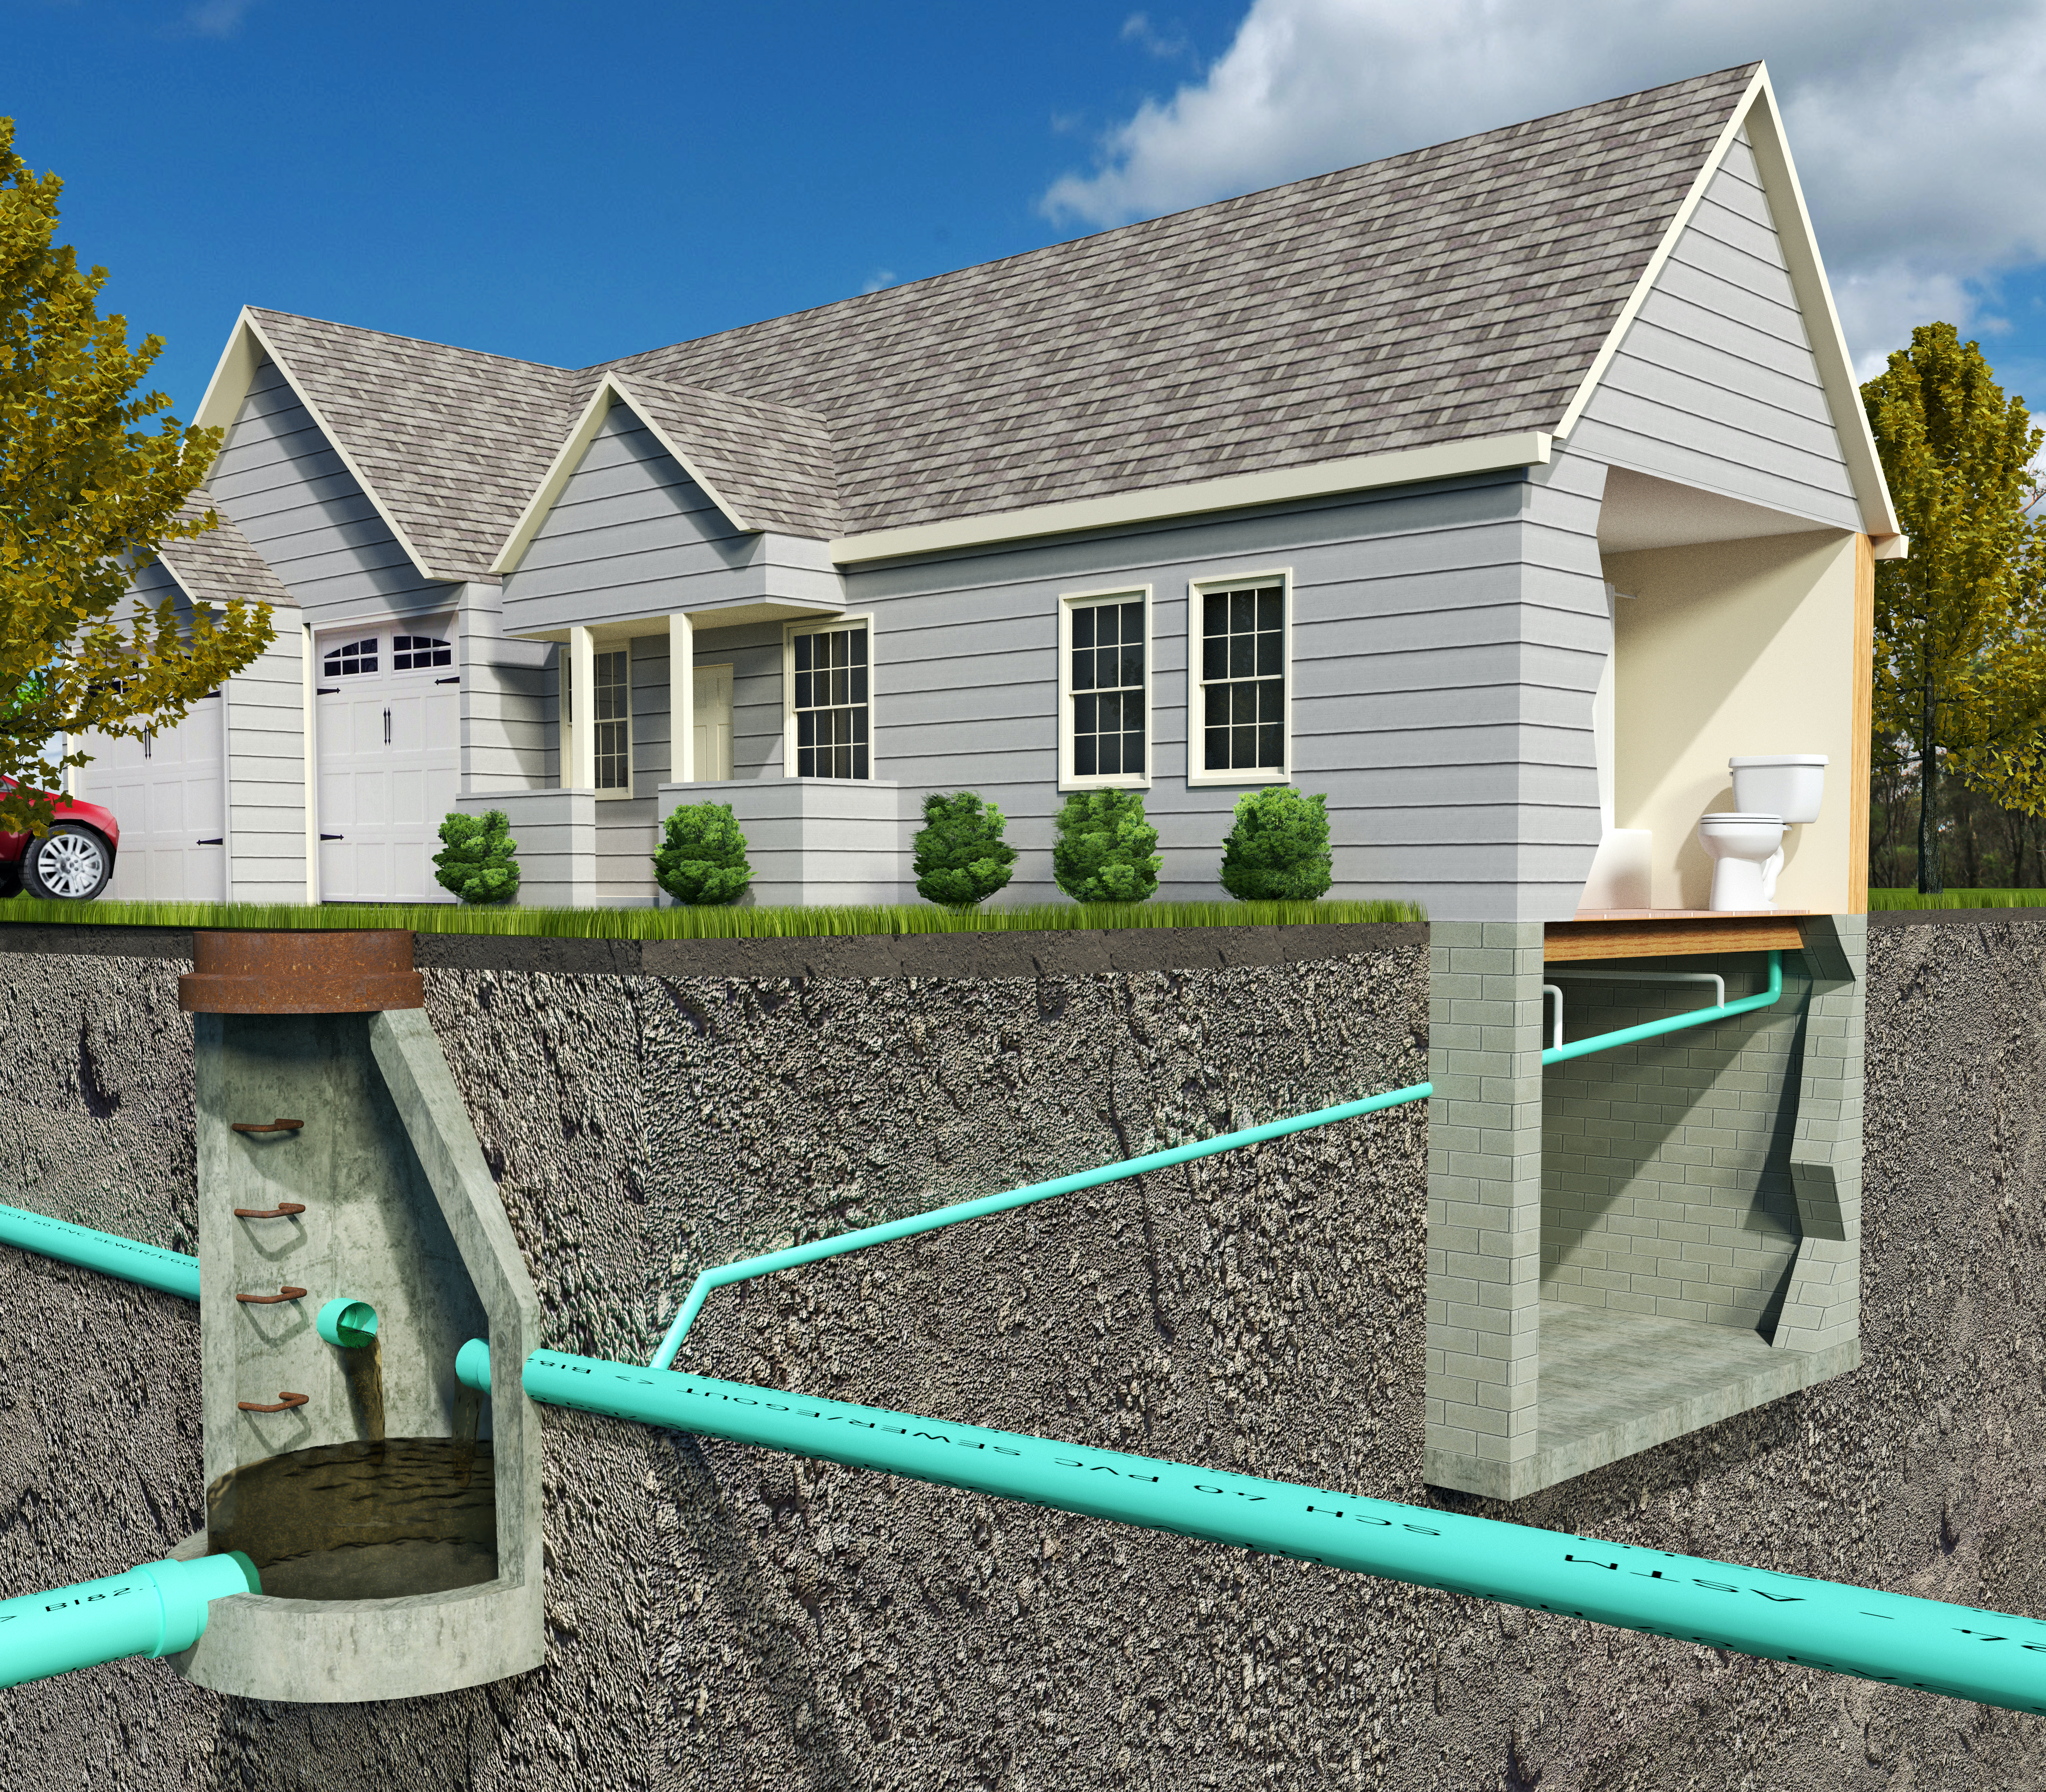 Illustration of a sanitary system at a house.